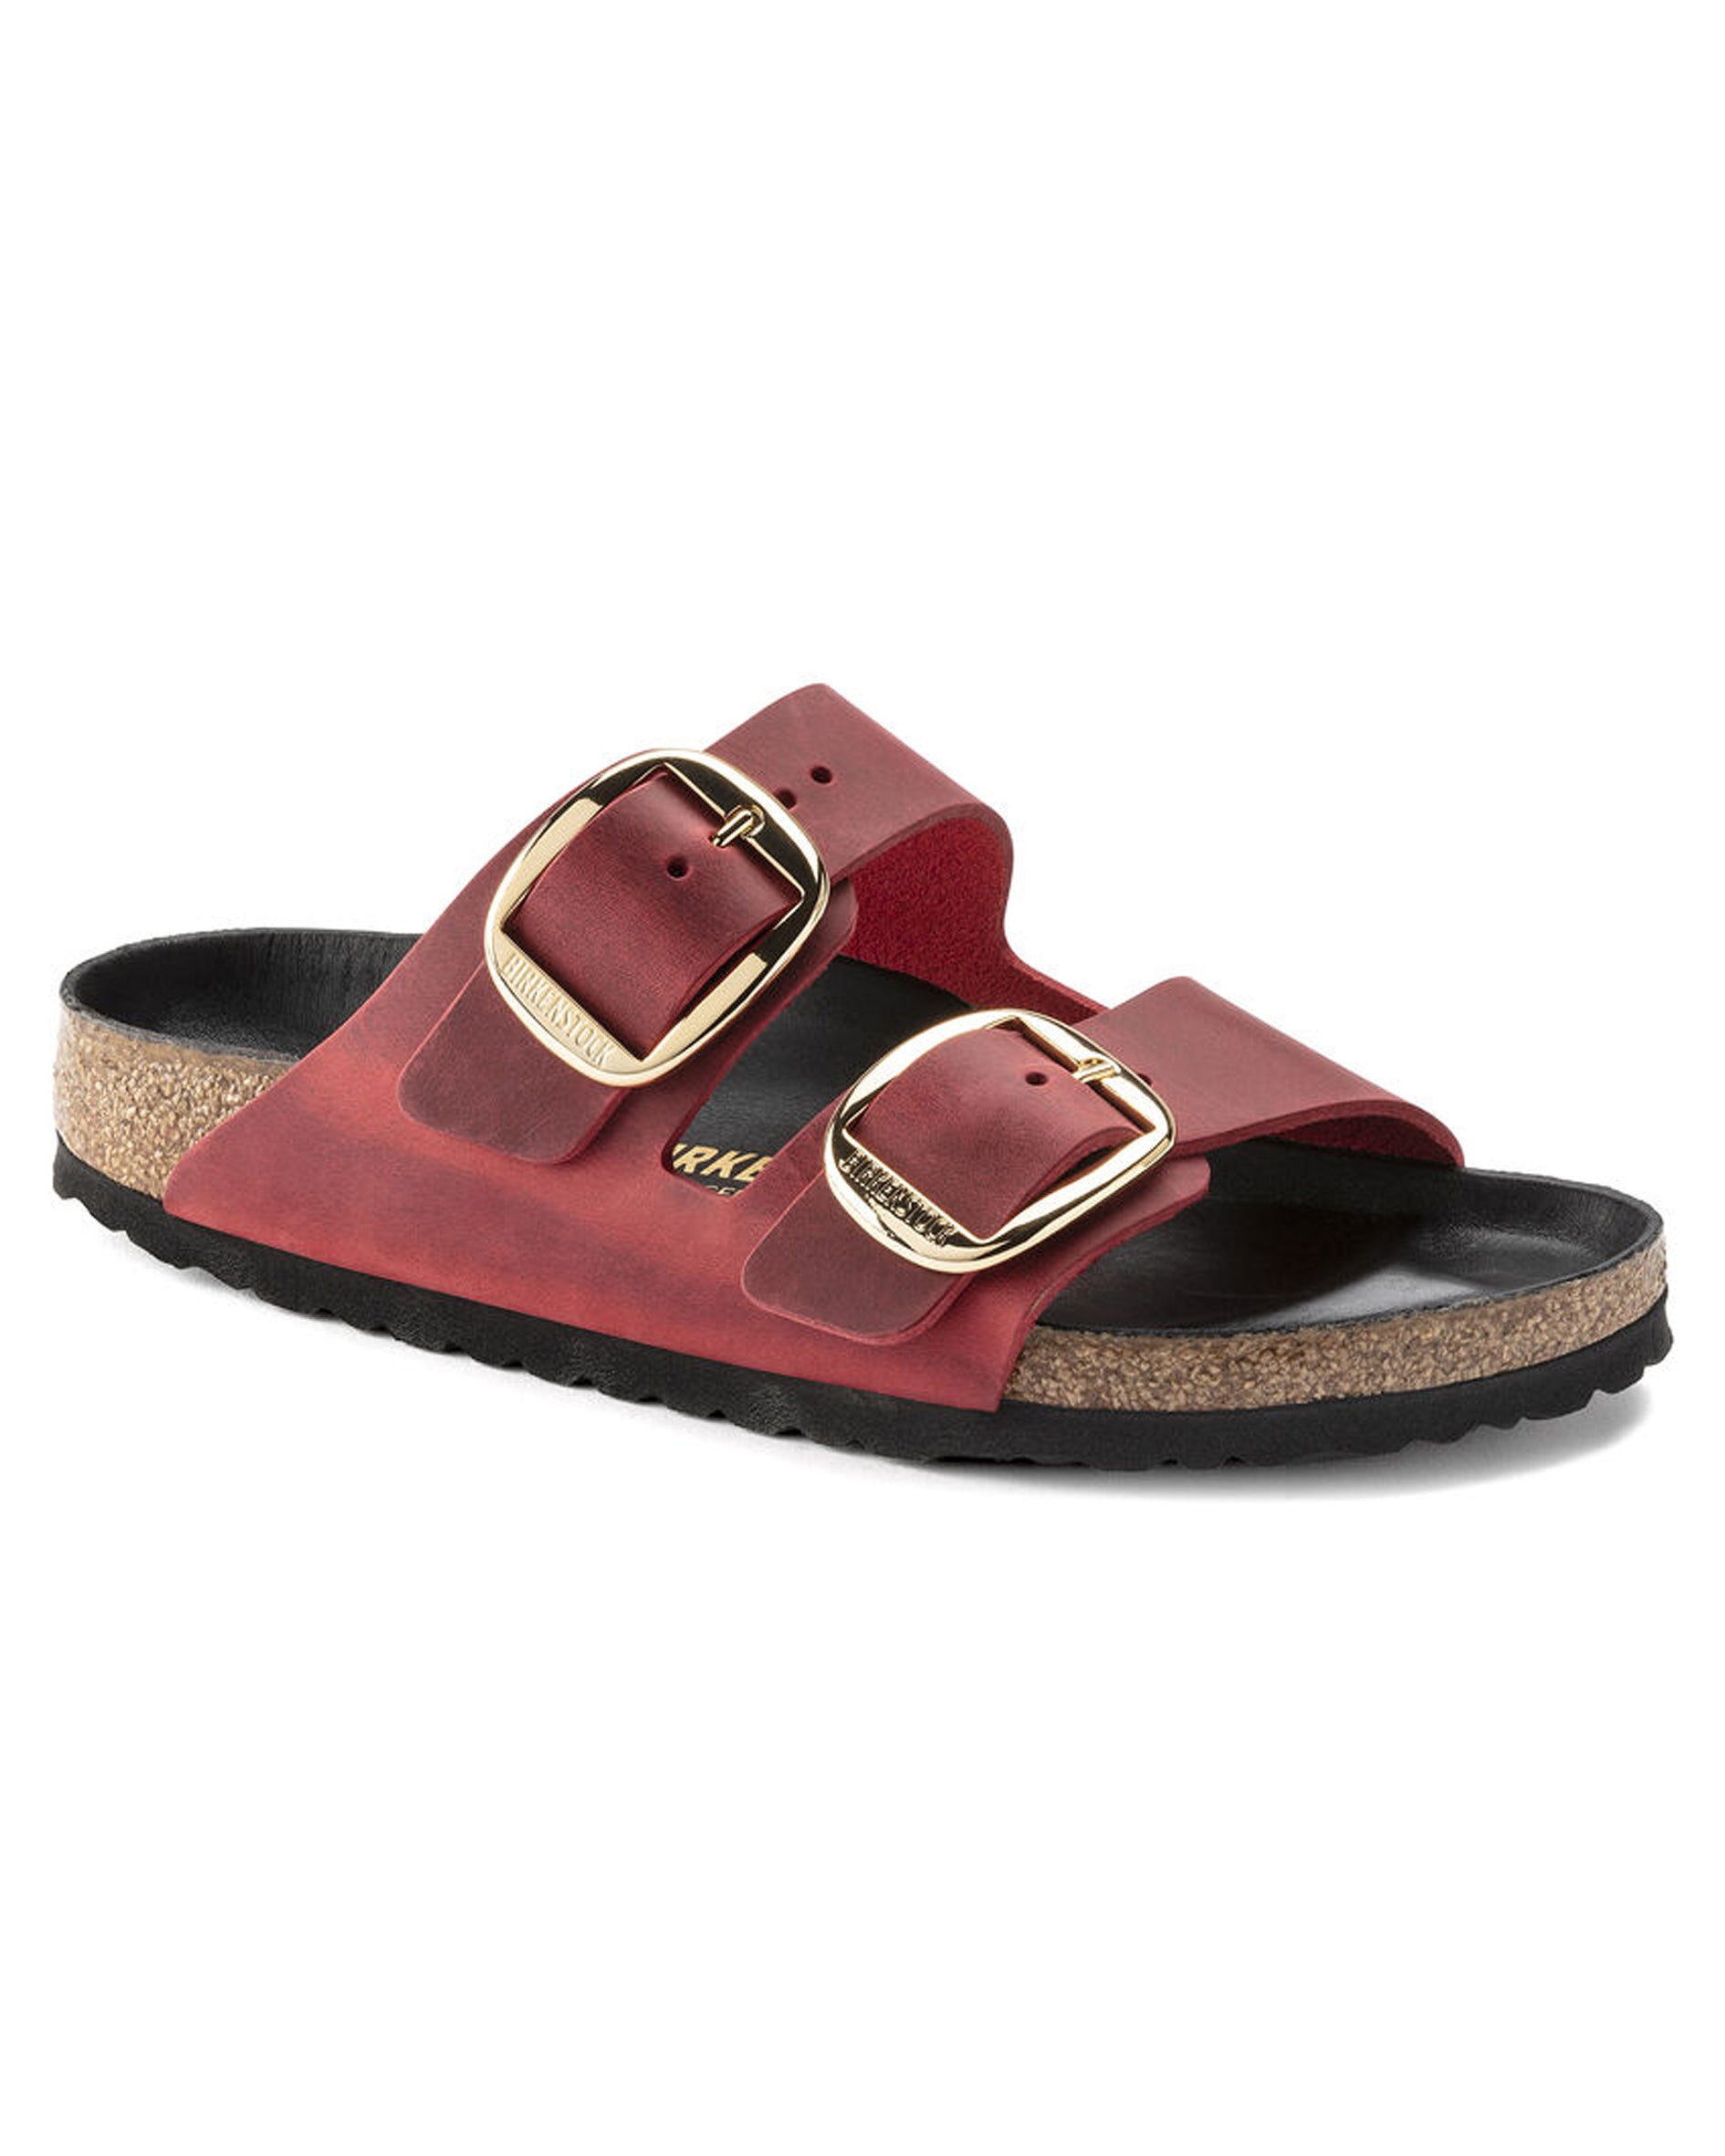 Arizona Big Buckle Fire Red Oiled Leather Sandals